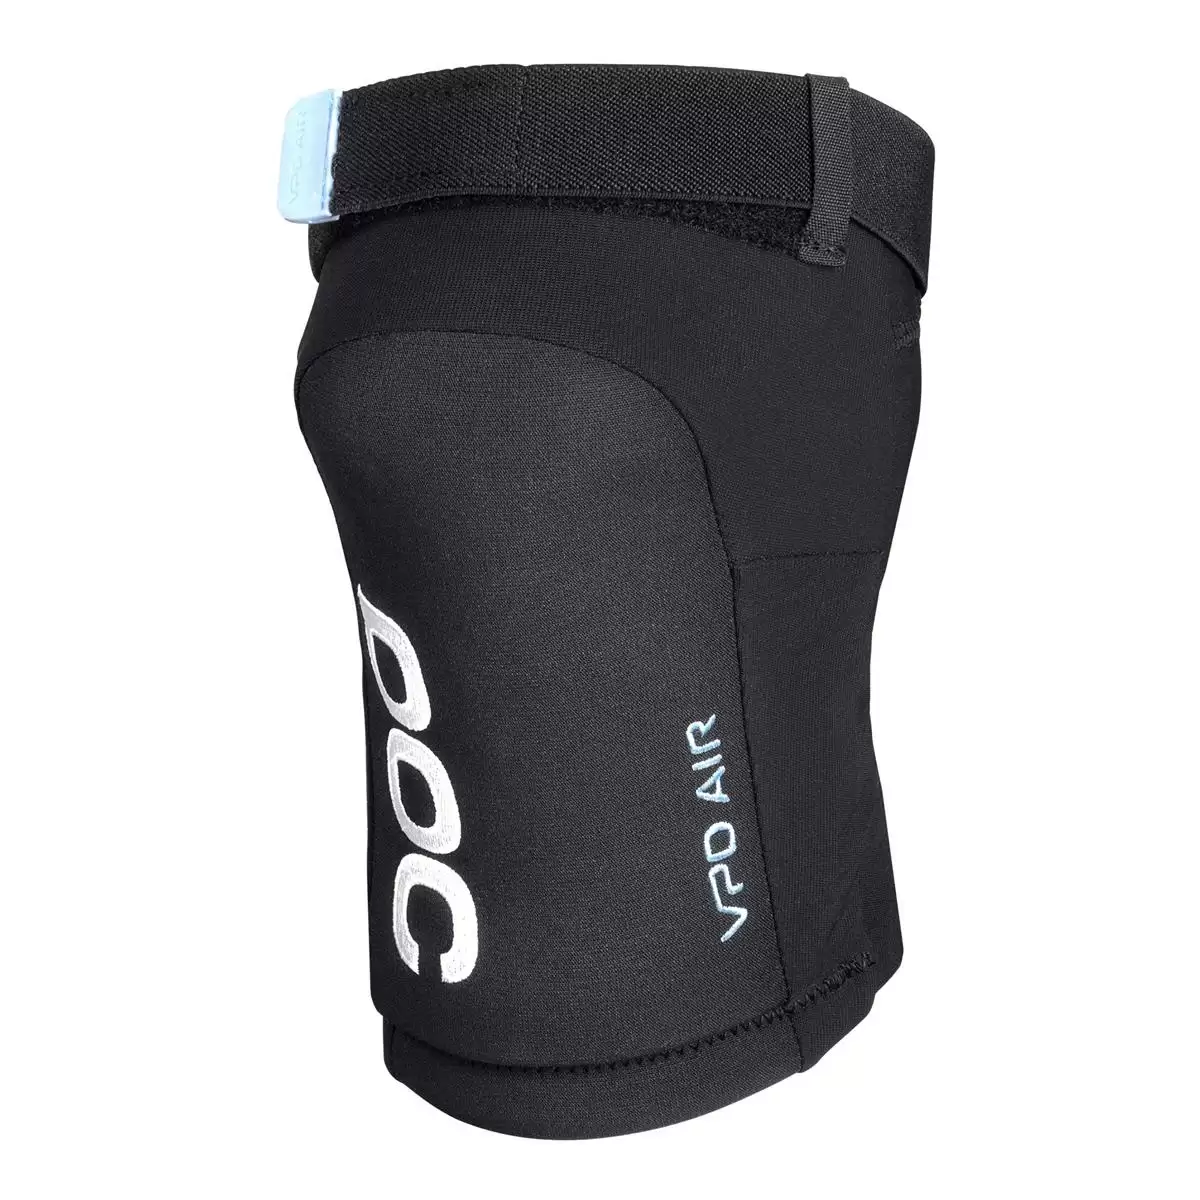 Joint VPD Air Knee pads black Size S #1